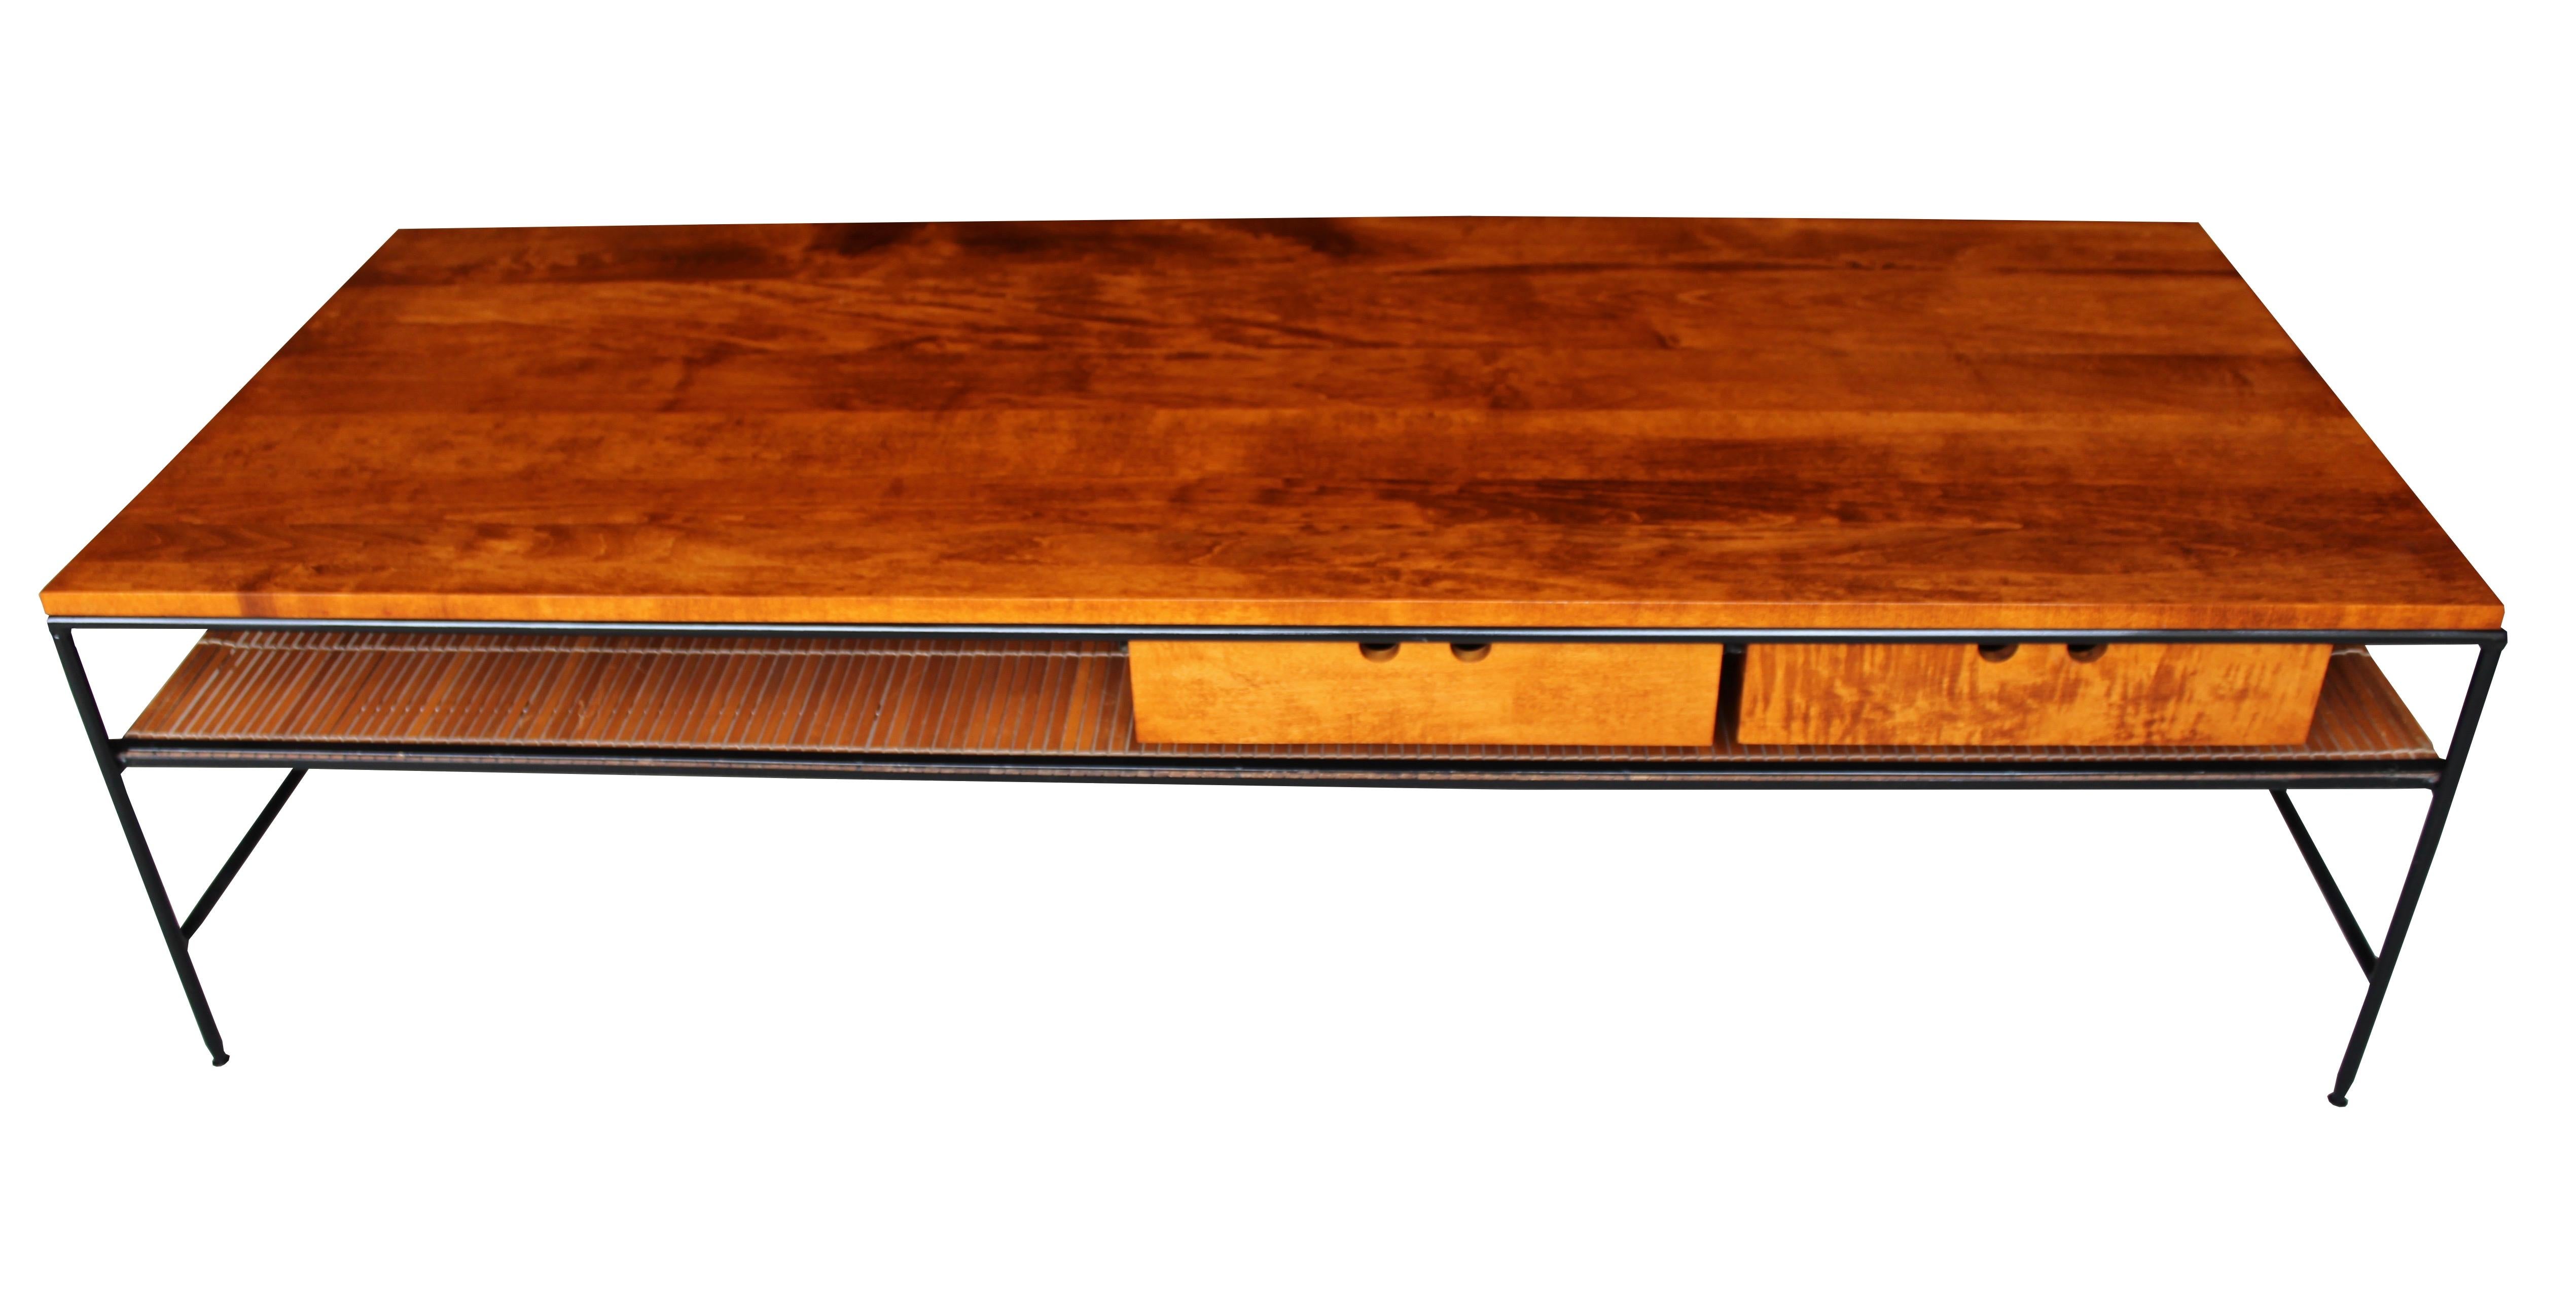 Mid-Century Modern Maple Coffee Table by Paul McCobb for Planner In Good Condition For Sale In Hudson, NY